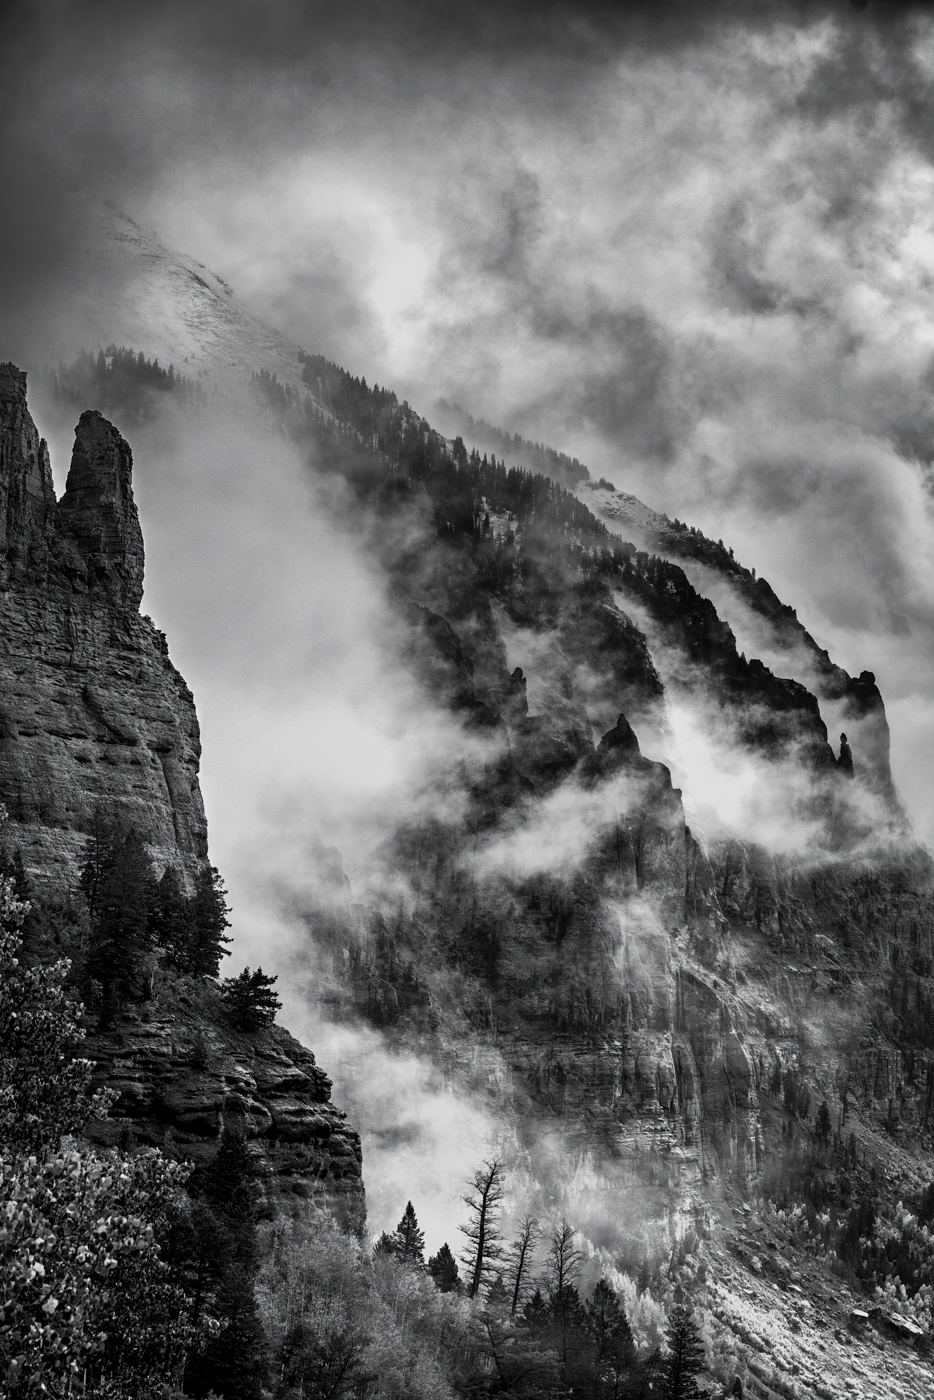 2nd PrizeOpen Mono In Class 3 By Nancy Powell For Fall Comes To The Rockies OCT-2021.jpg